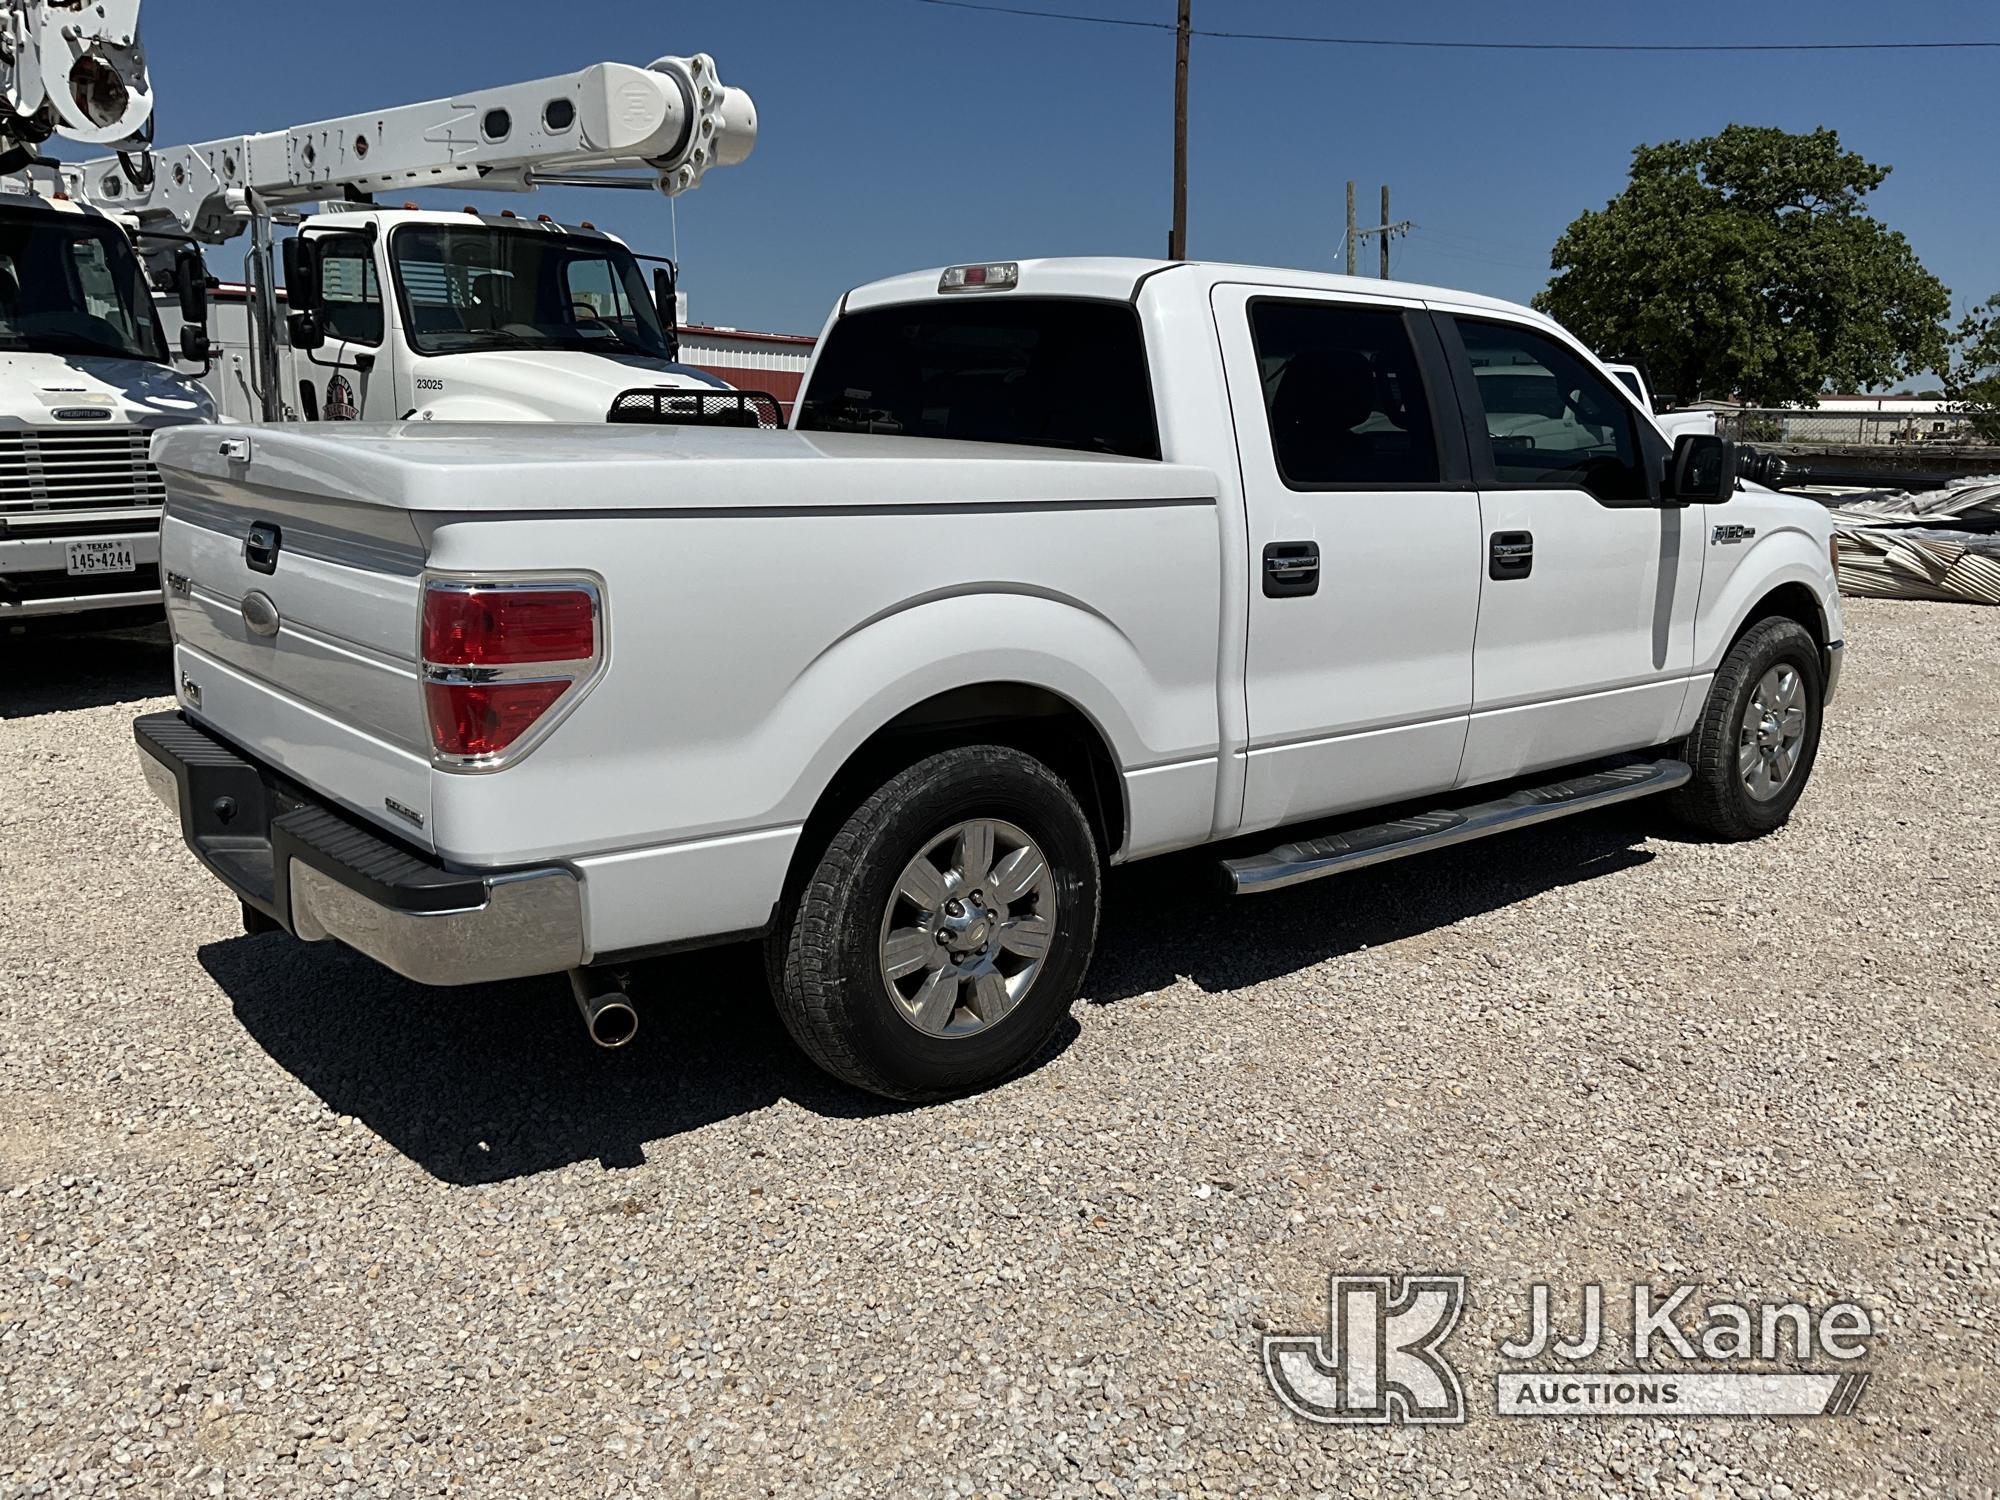 (Azle, TX) 2011 Ford F150 Crew-Cab Pickup Truck Runs & Moves) (Cooperative owned